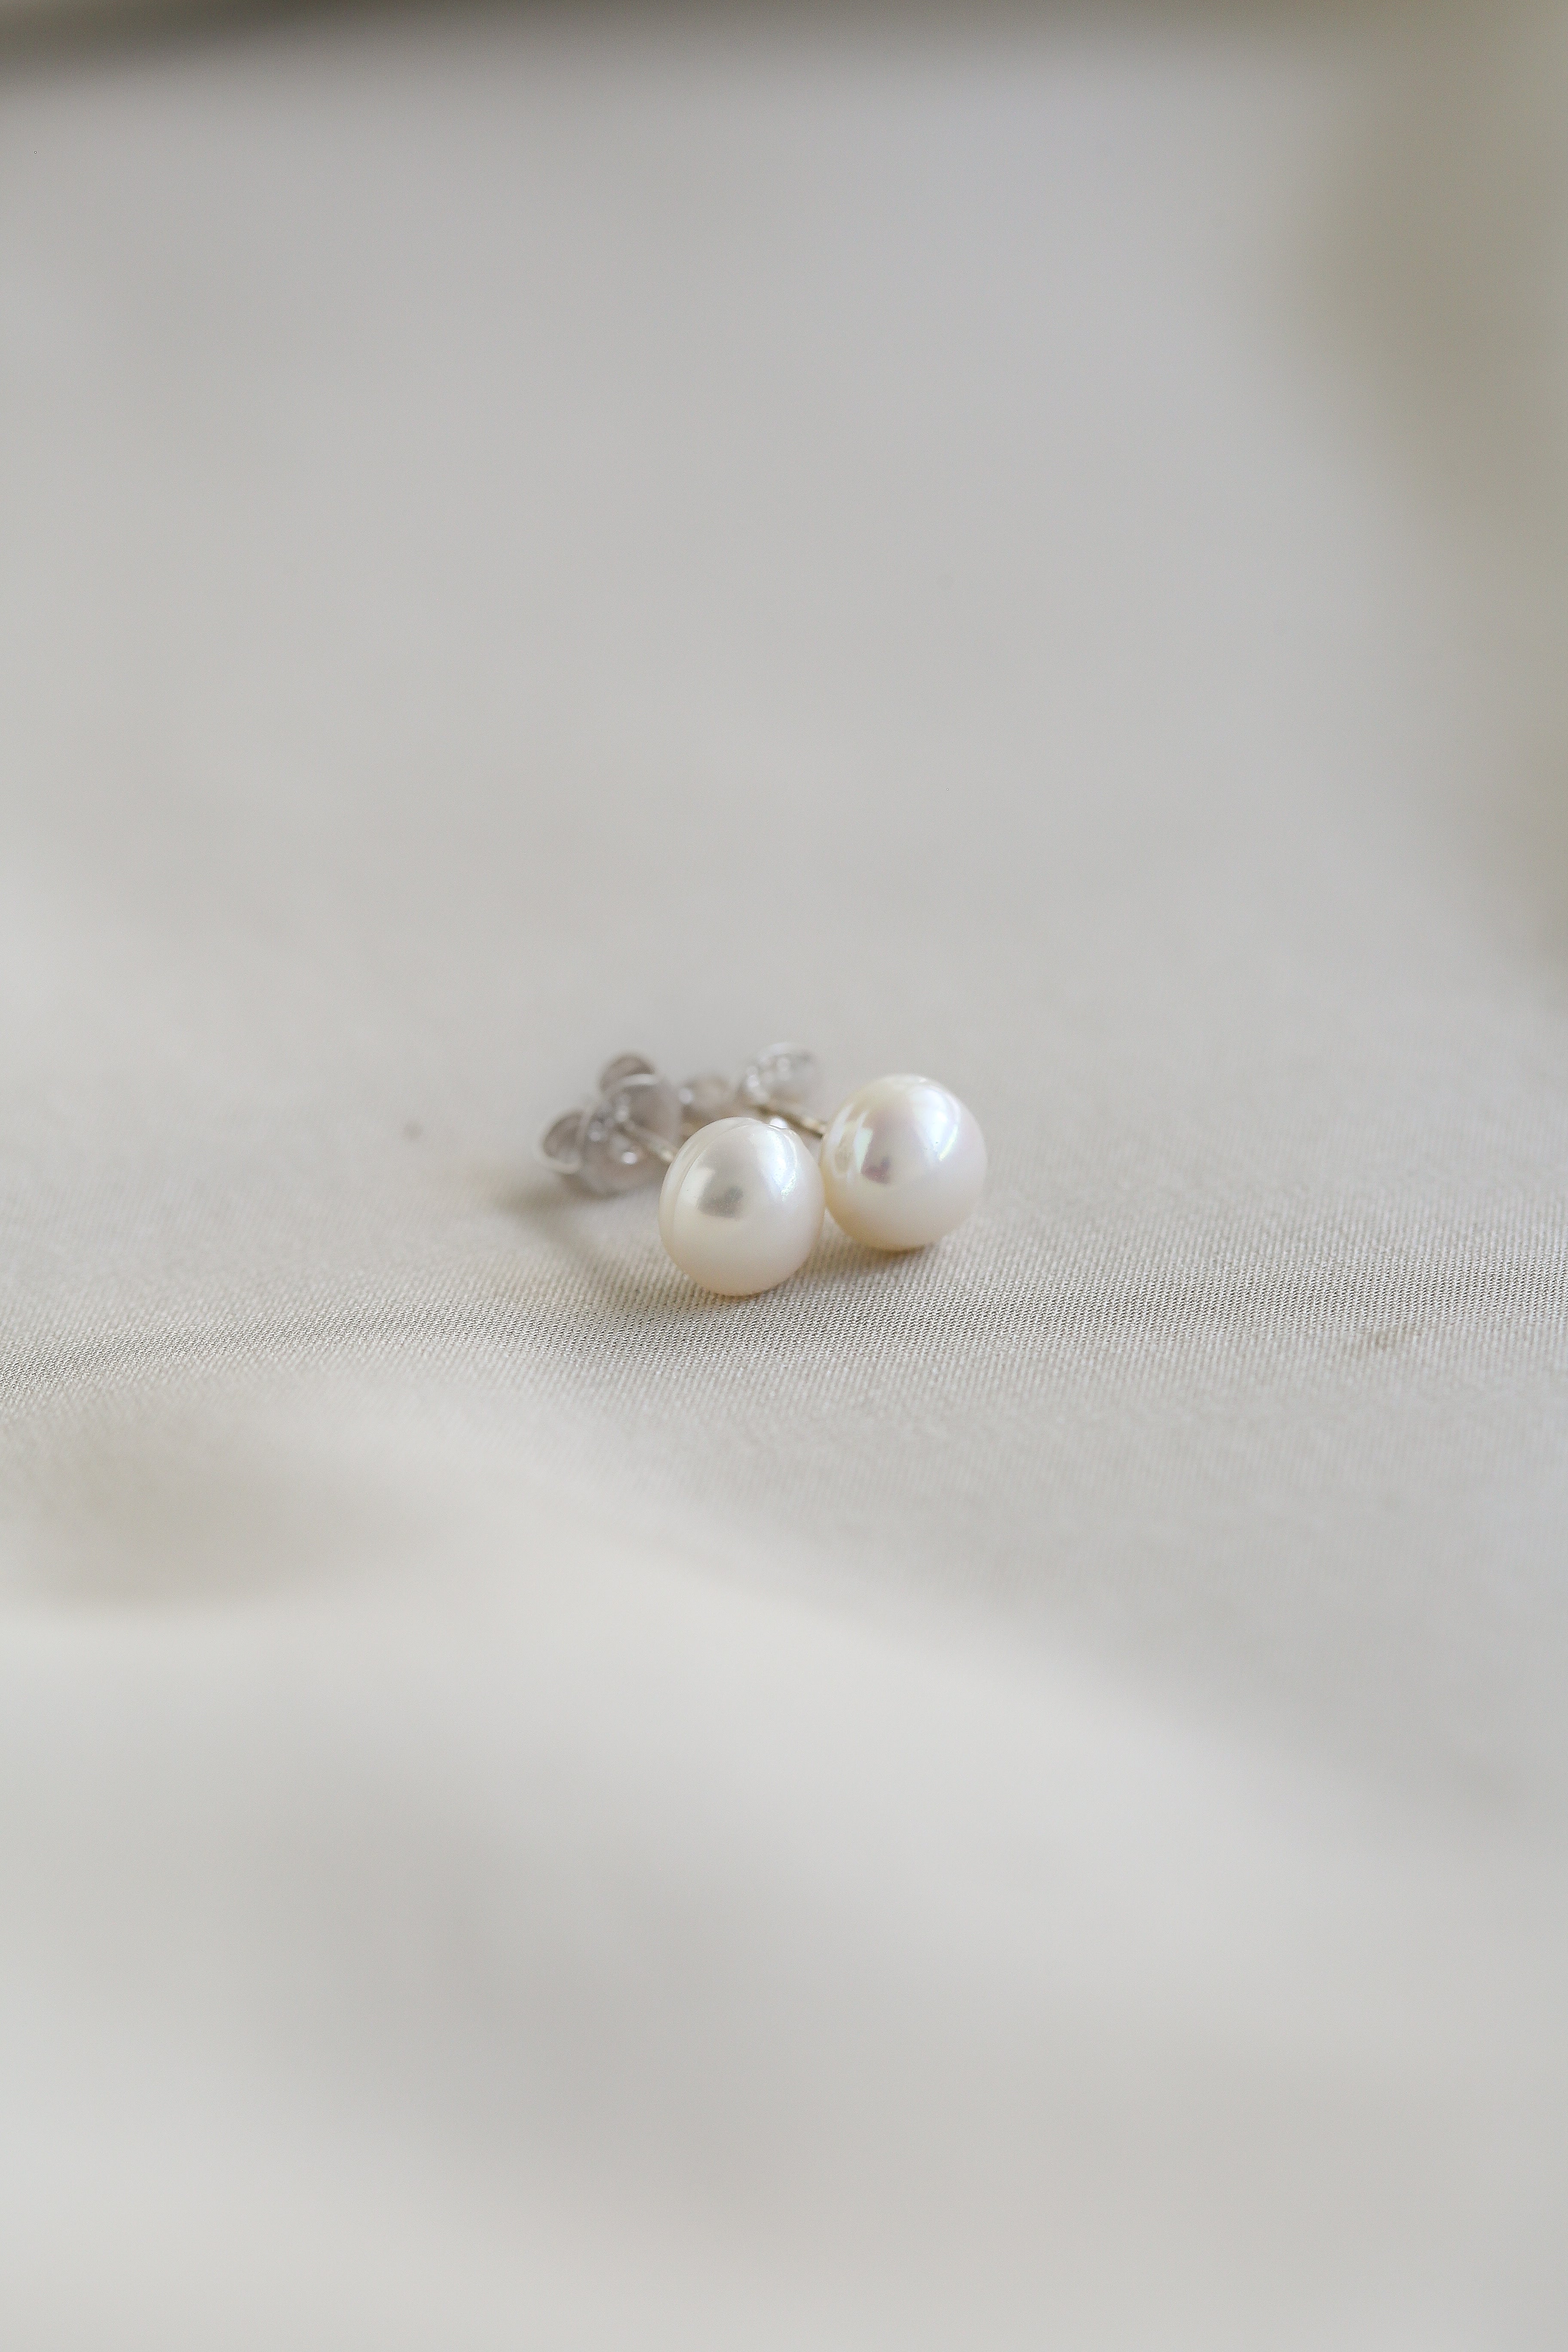 Lili Studs - Boutique Minimaliste has waterproof, durable, elegant and vintage inspired jewelry